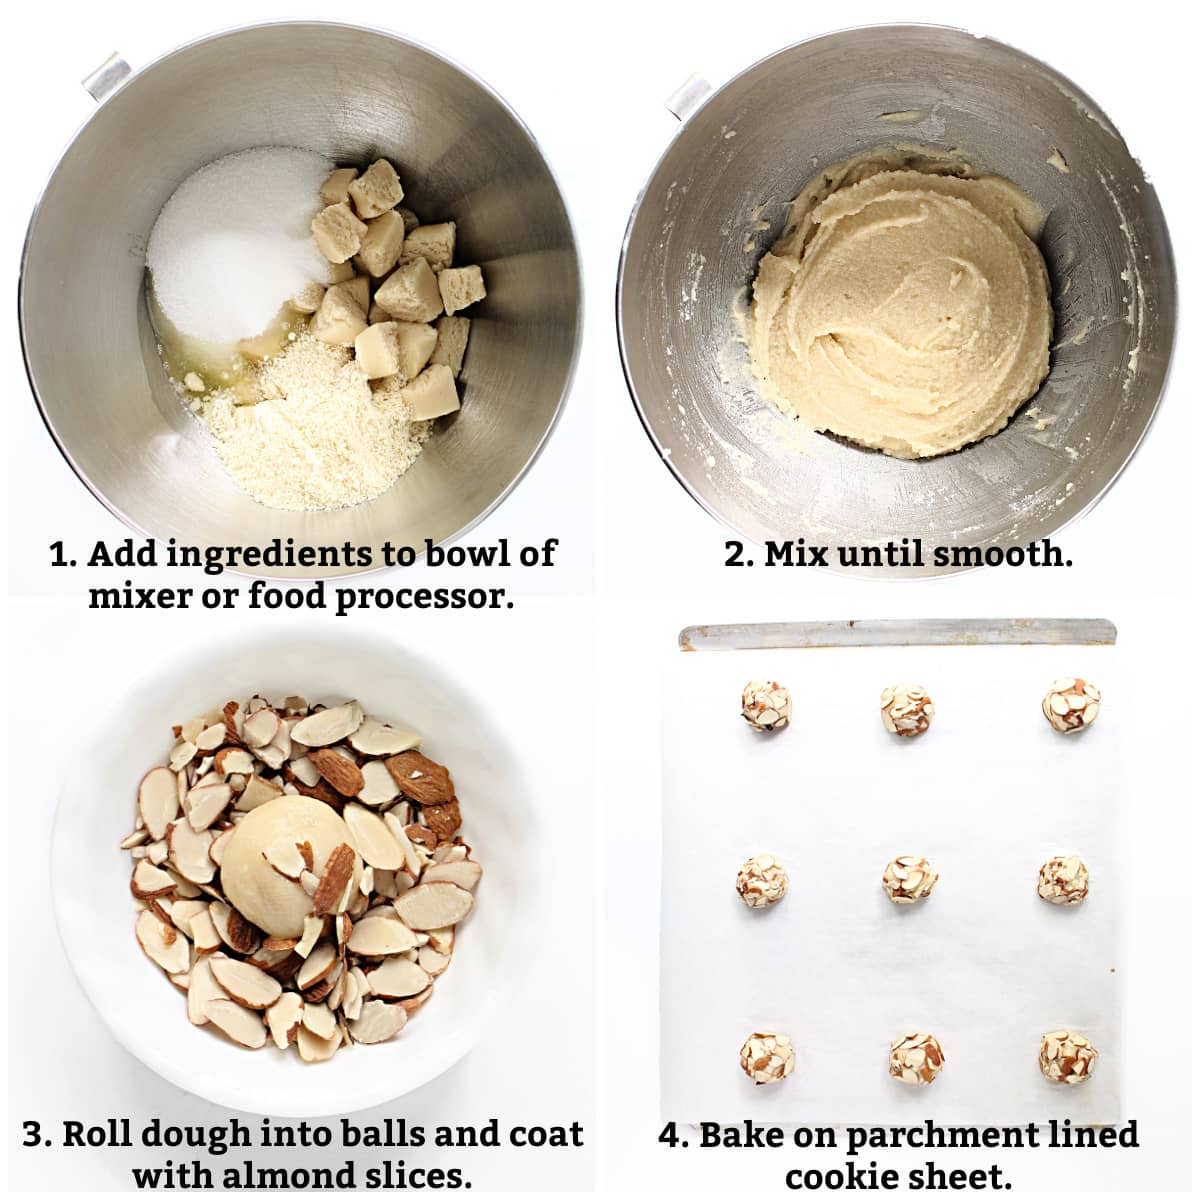 Instructions labeled; add ingredients to mixer bowl, mix, roll into balls, coat with almonds, bake.